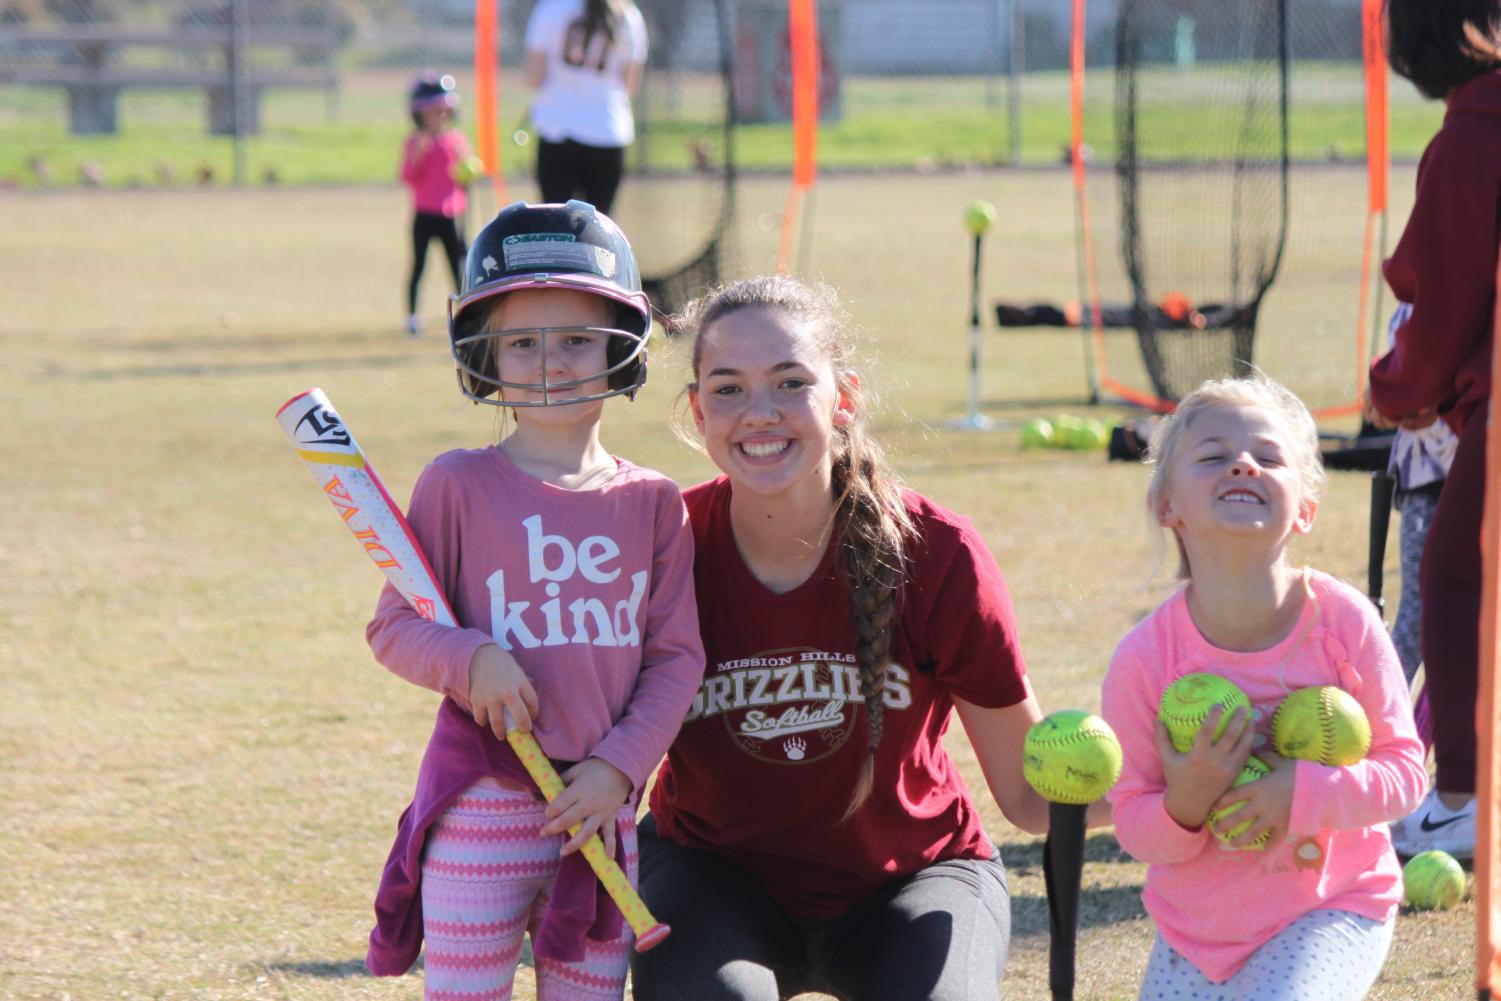 The+softball+team+volunteers+at+a+clinic+to+help+aspiring+young+players